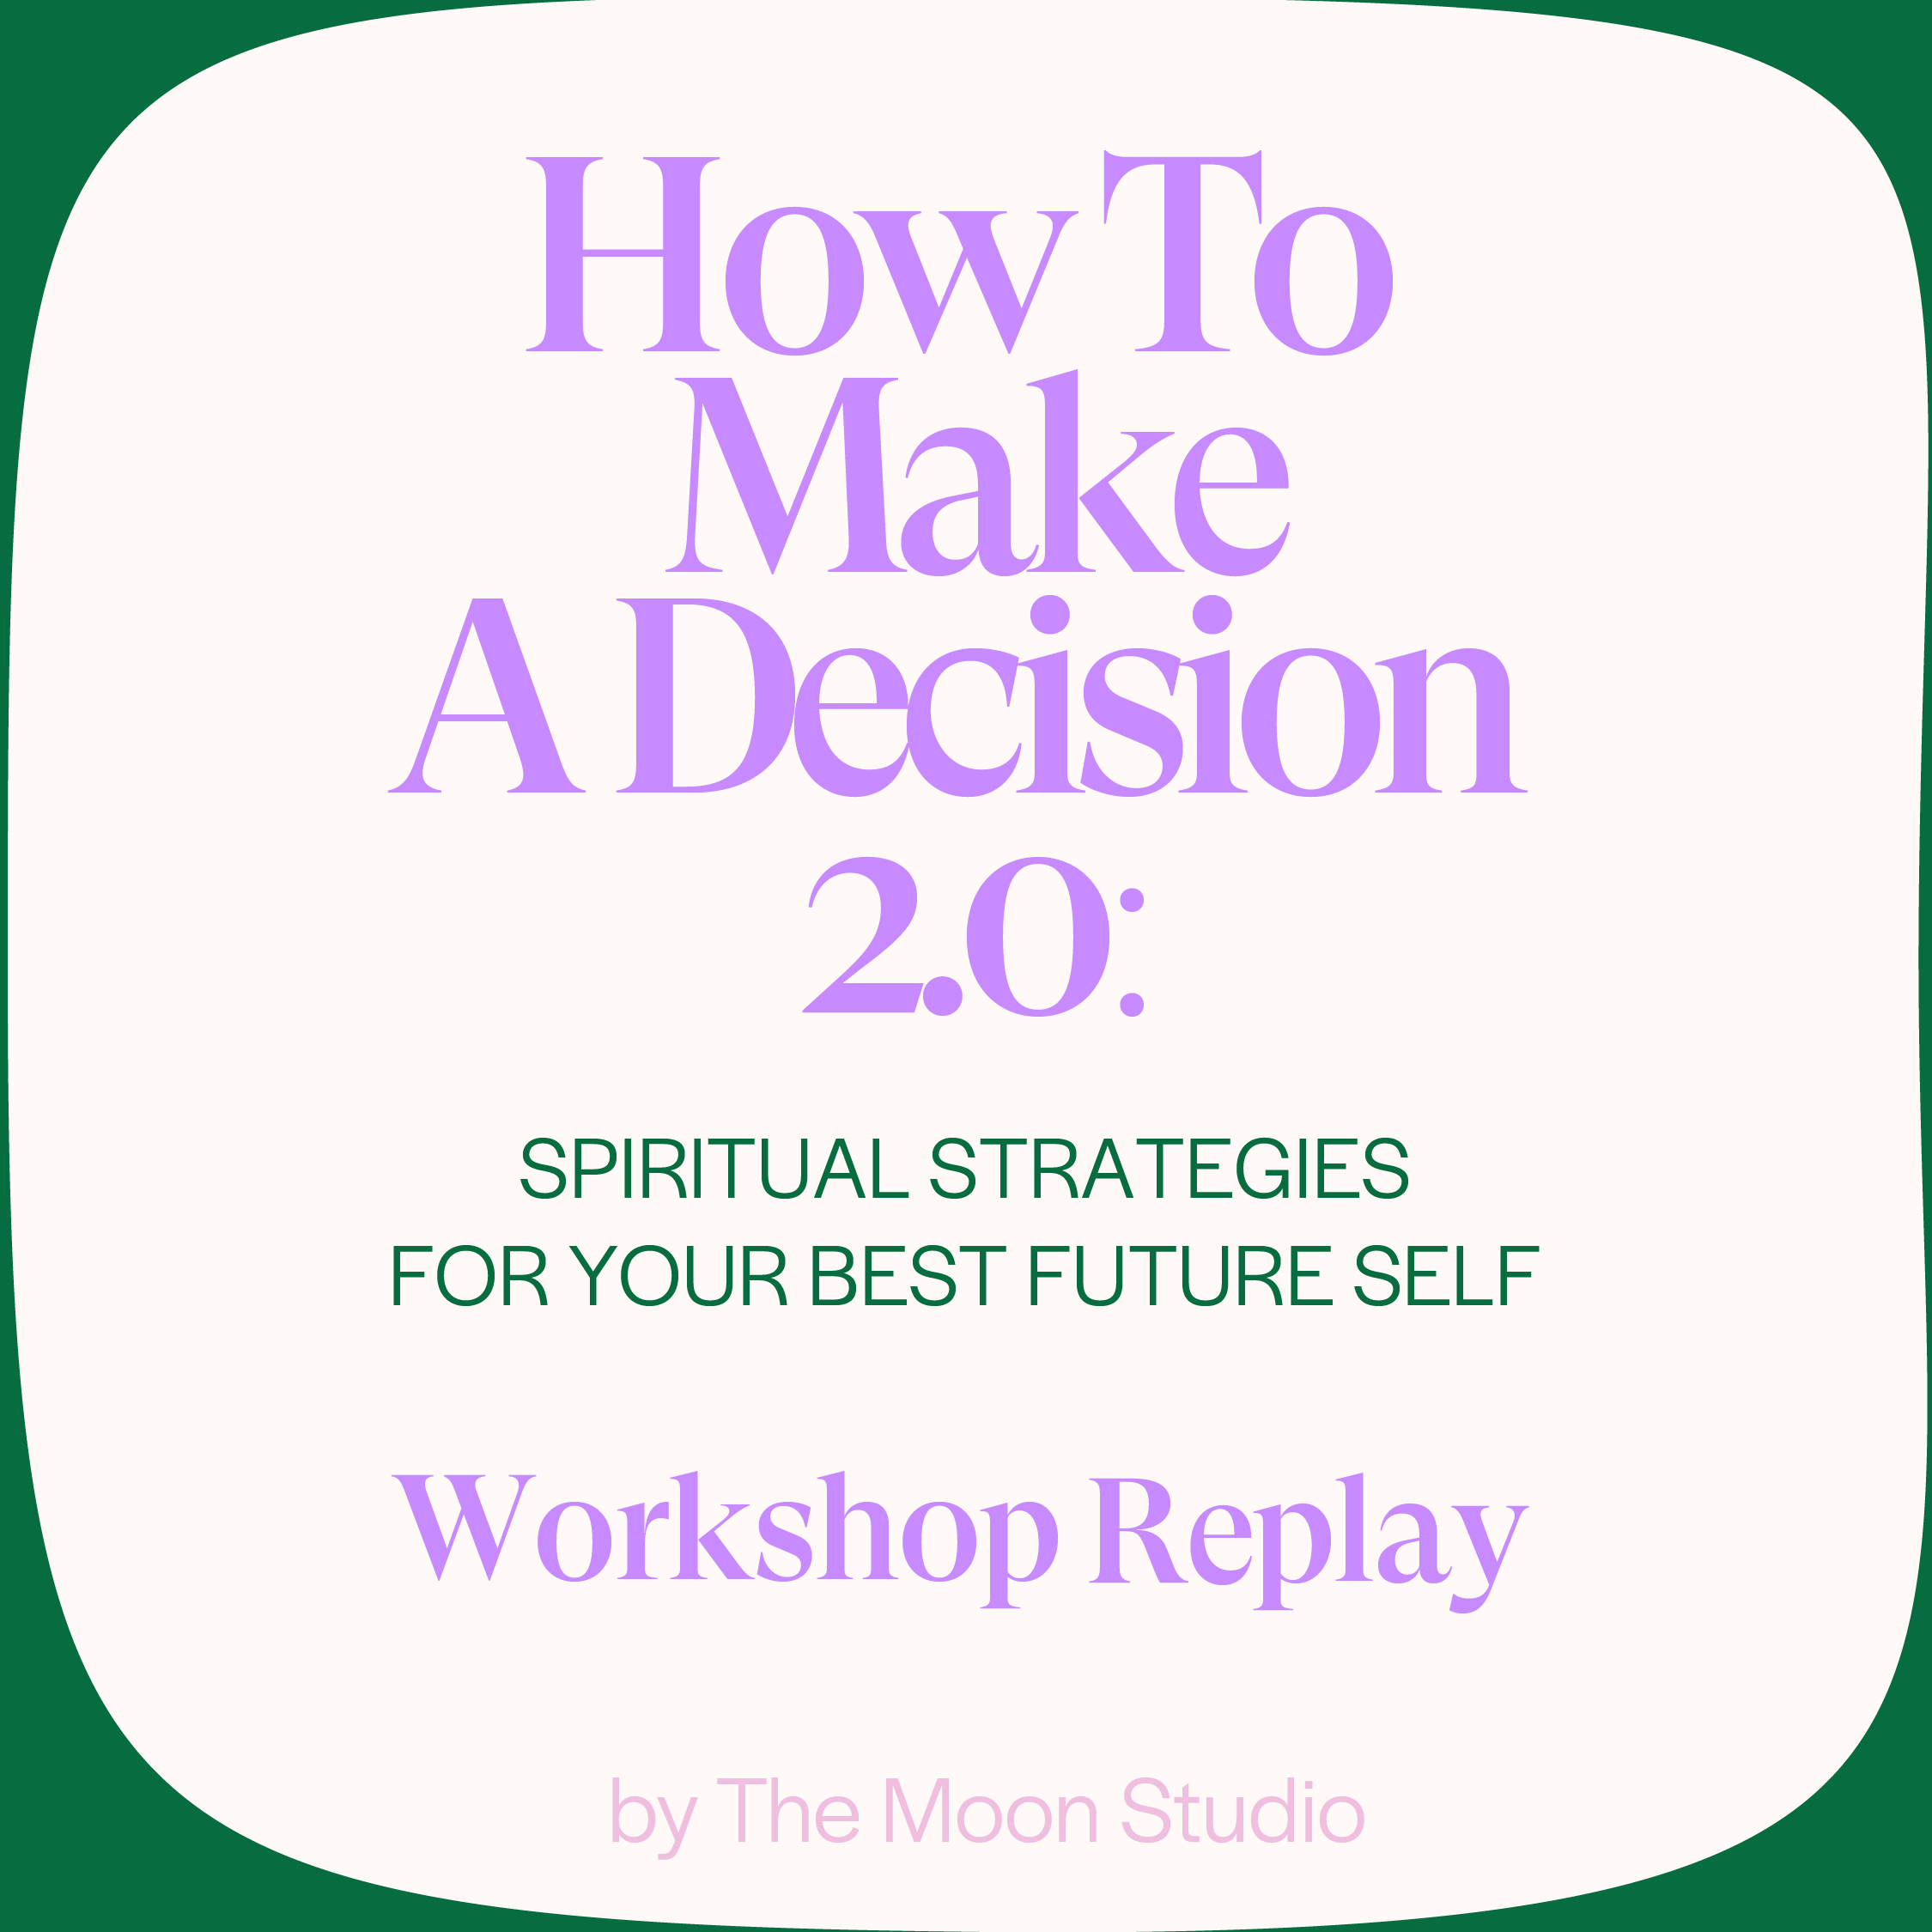 How_To_Make_A_Decision2.0_Moon_Studio-01.png